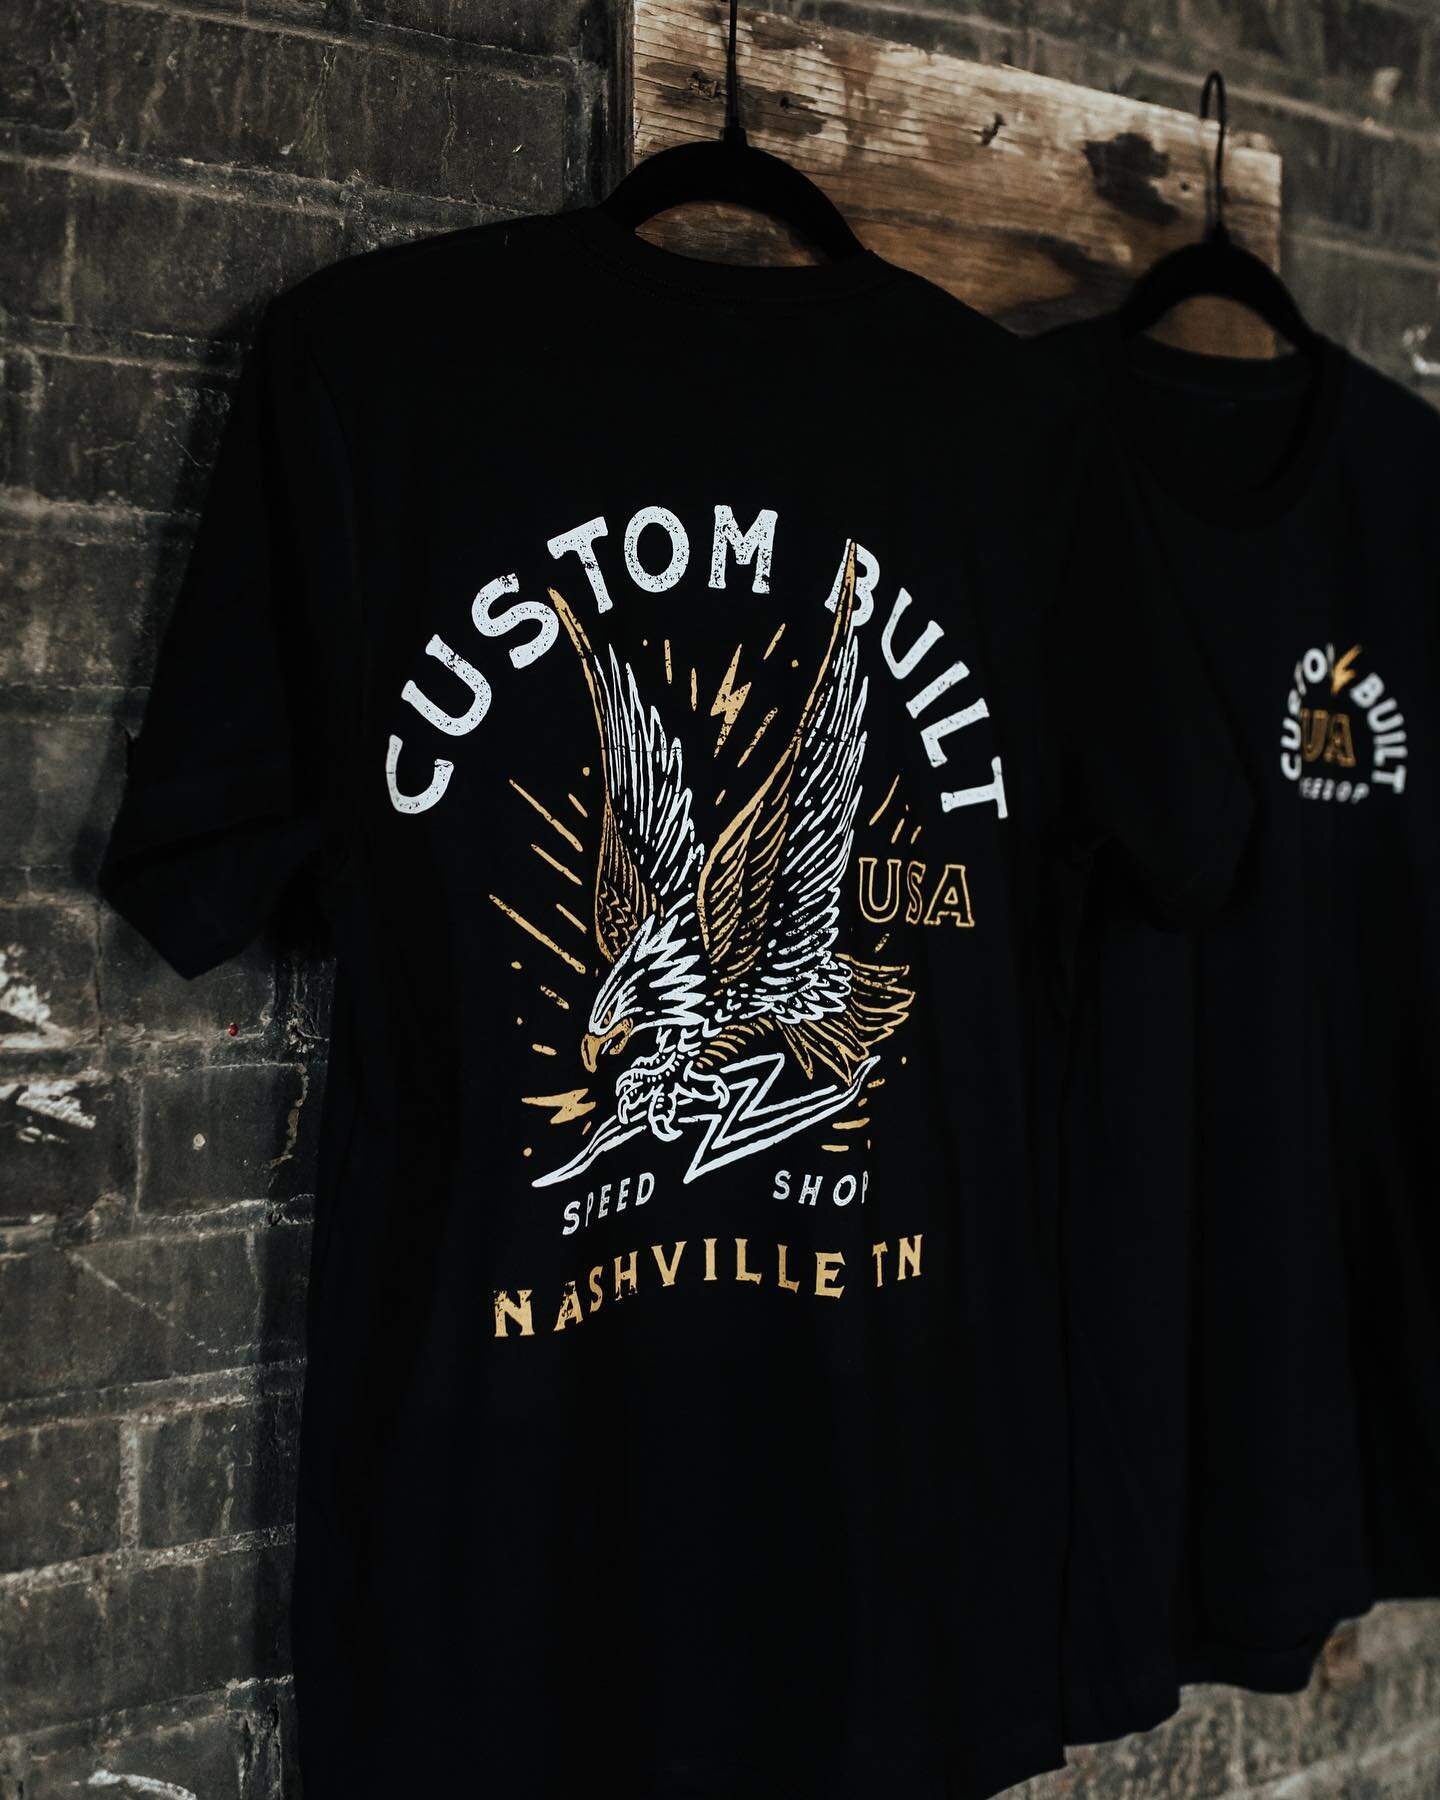 𝙁𝙍𝙀𝙀𝘿𝙊𝙈 𝙁𝙄𝙂𝙃𝙏𝙀𝙍 🦅 

Our Eagle Tee is an ode to fighting the good fight. This eagle never surrenders to the size or the strength of its prey and always puts up a fight to win and regain its territory!

Printed on a classic heavy spun co